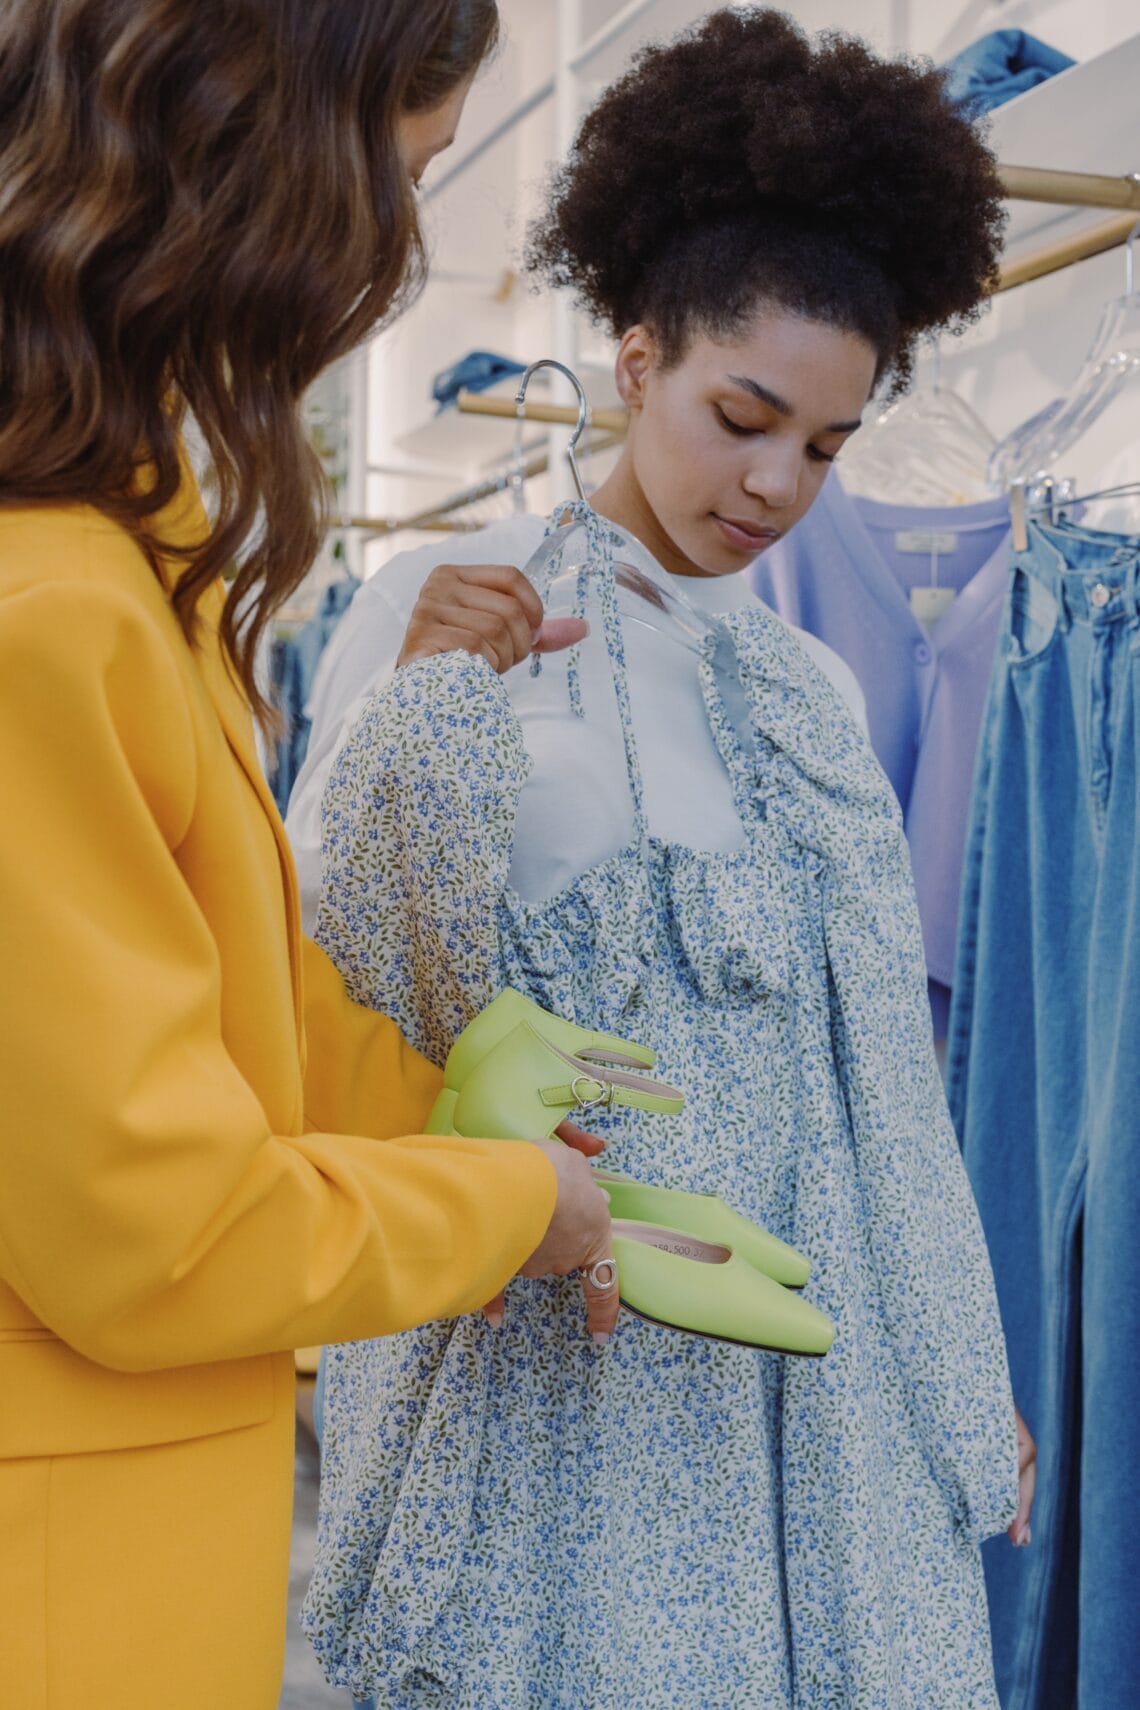 Why you should absolutely hire a personal stylist